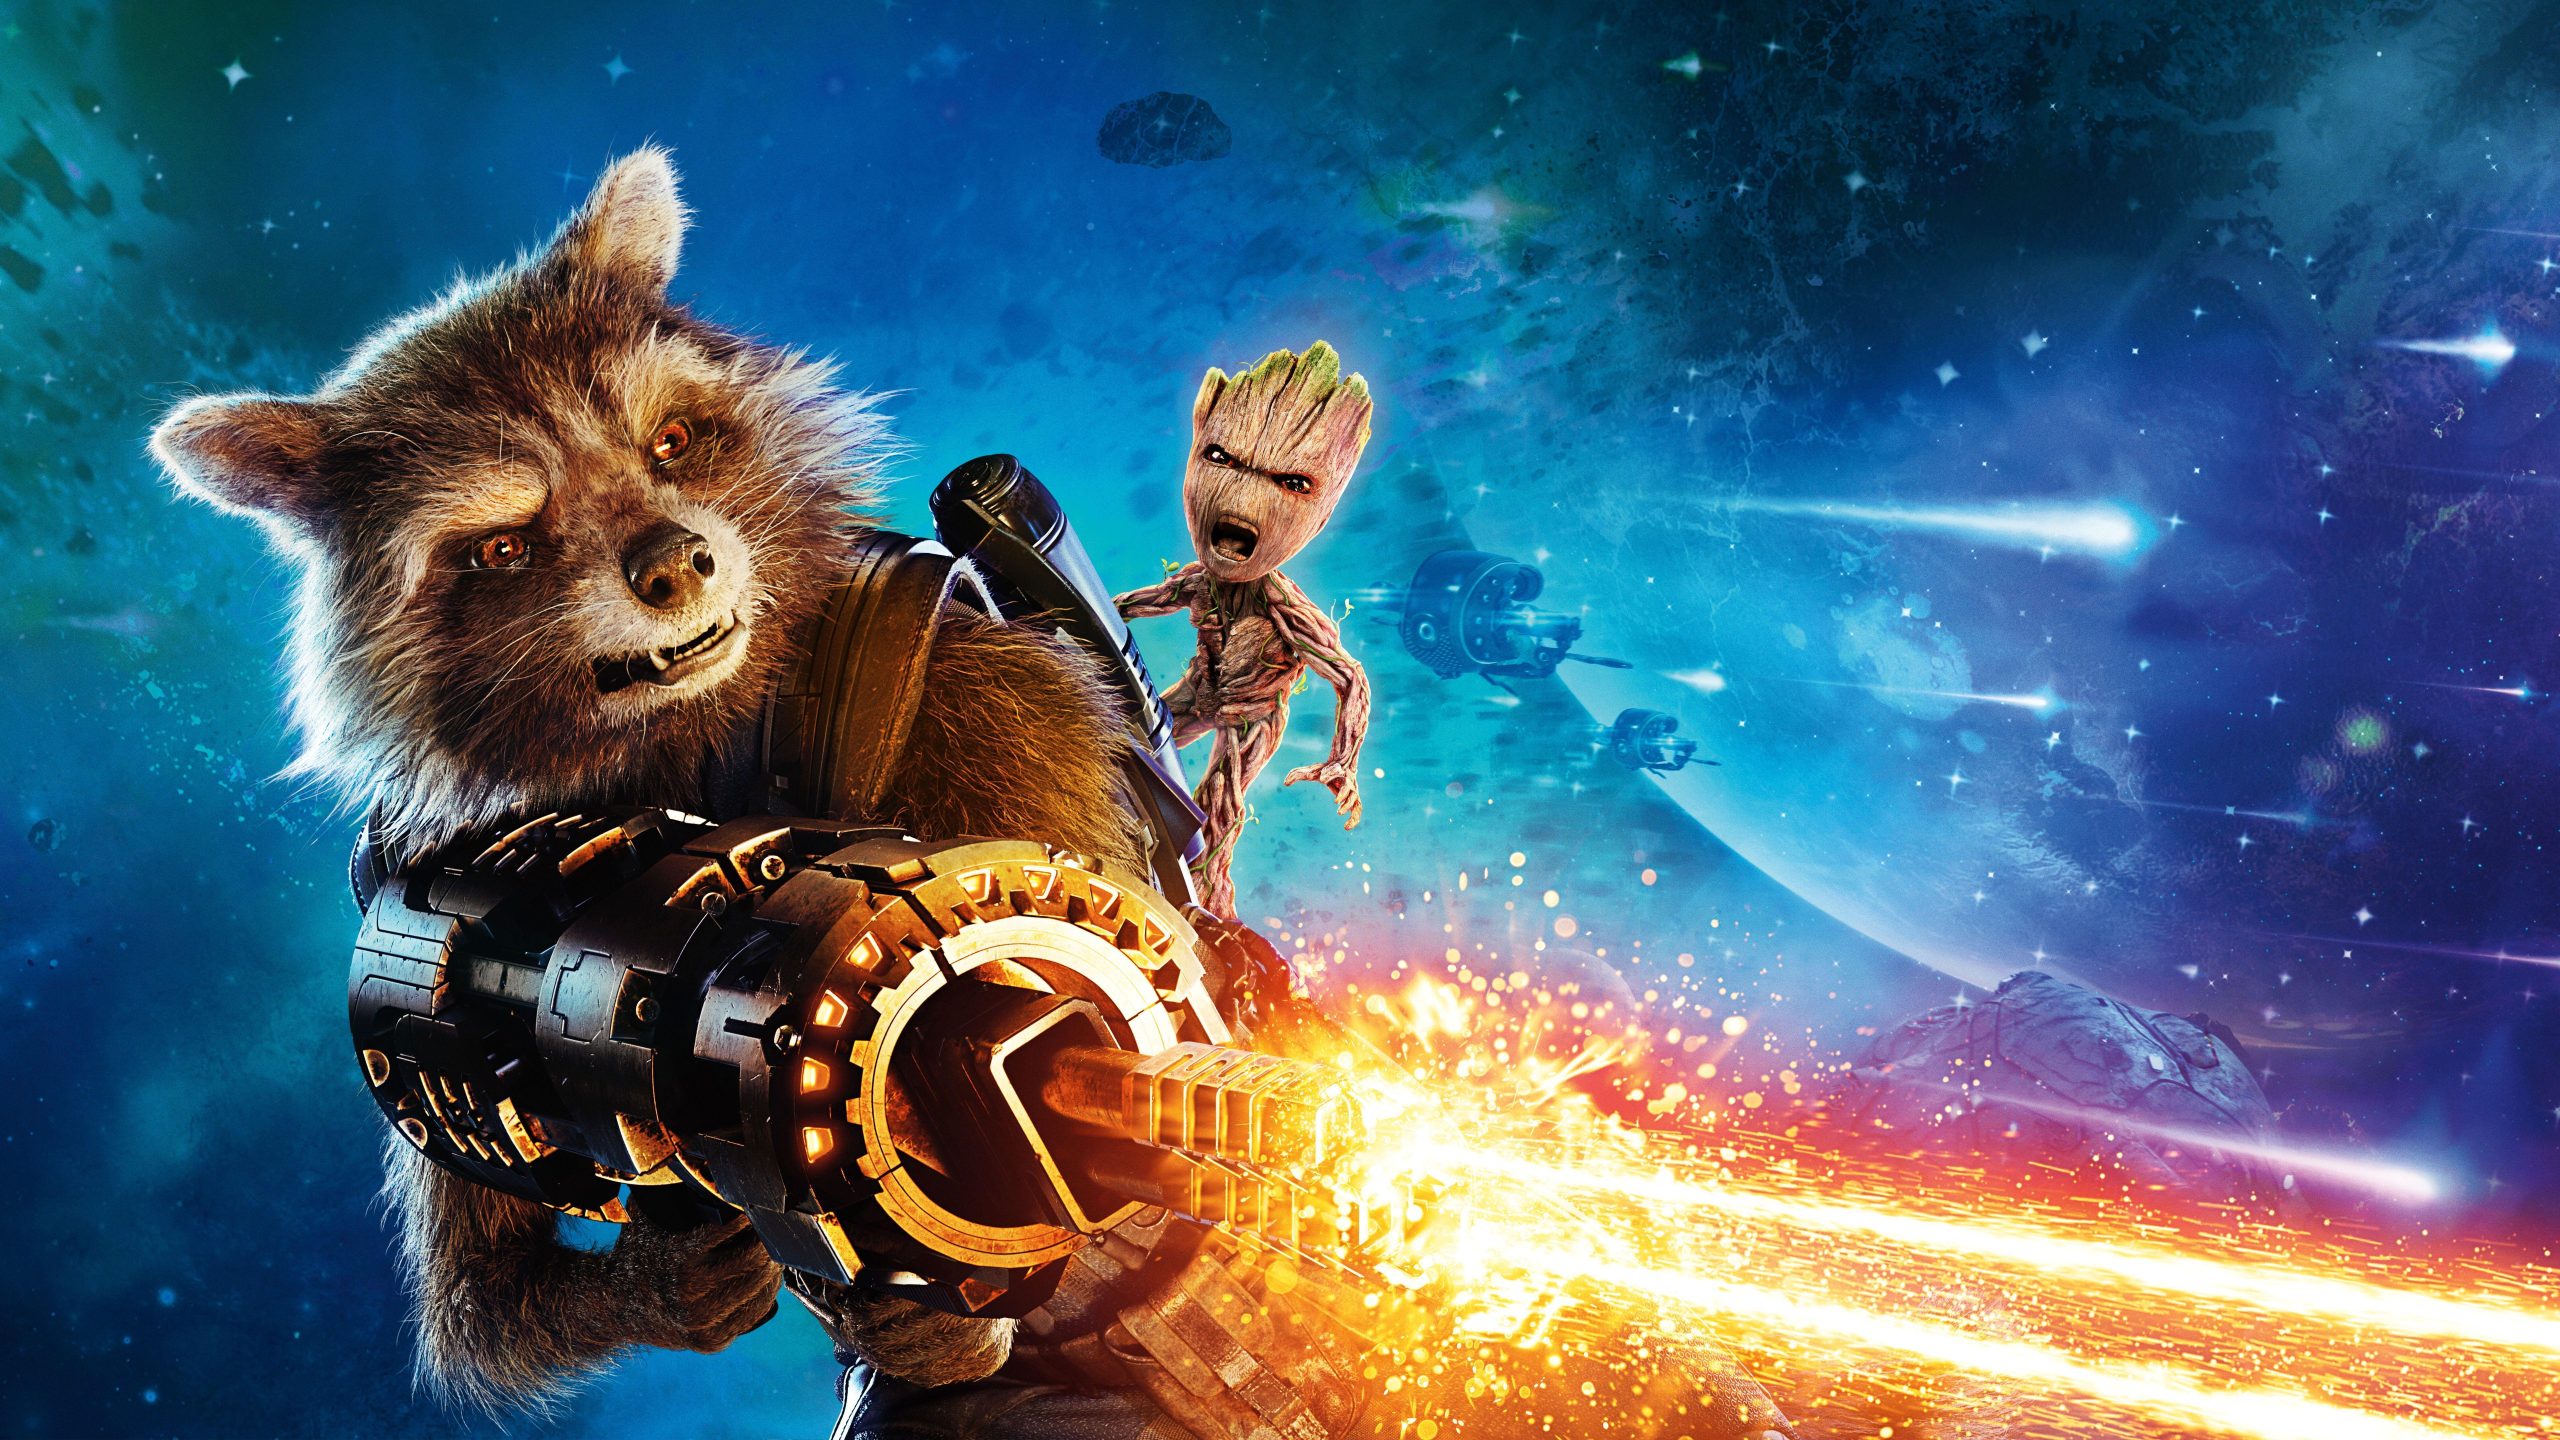 The Guardians Of The Galaxy Pc Wallpaper, The Guardians Of The Galaxy, Movies